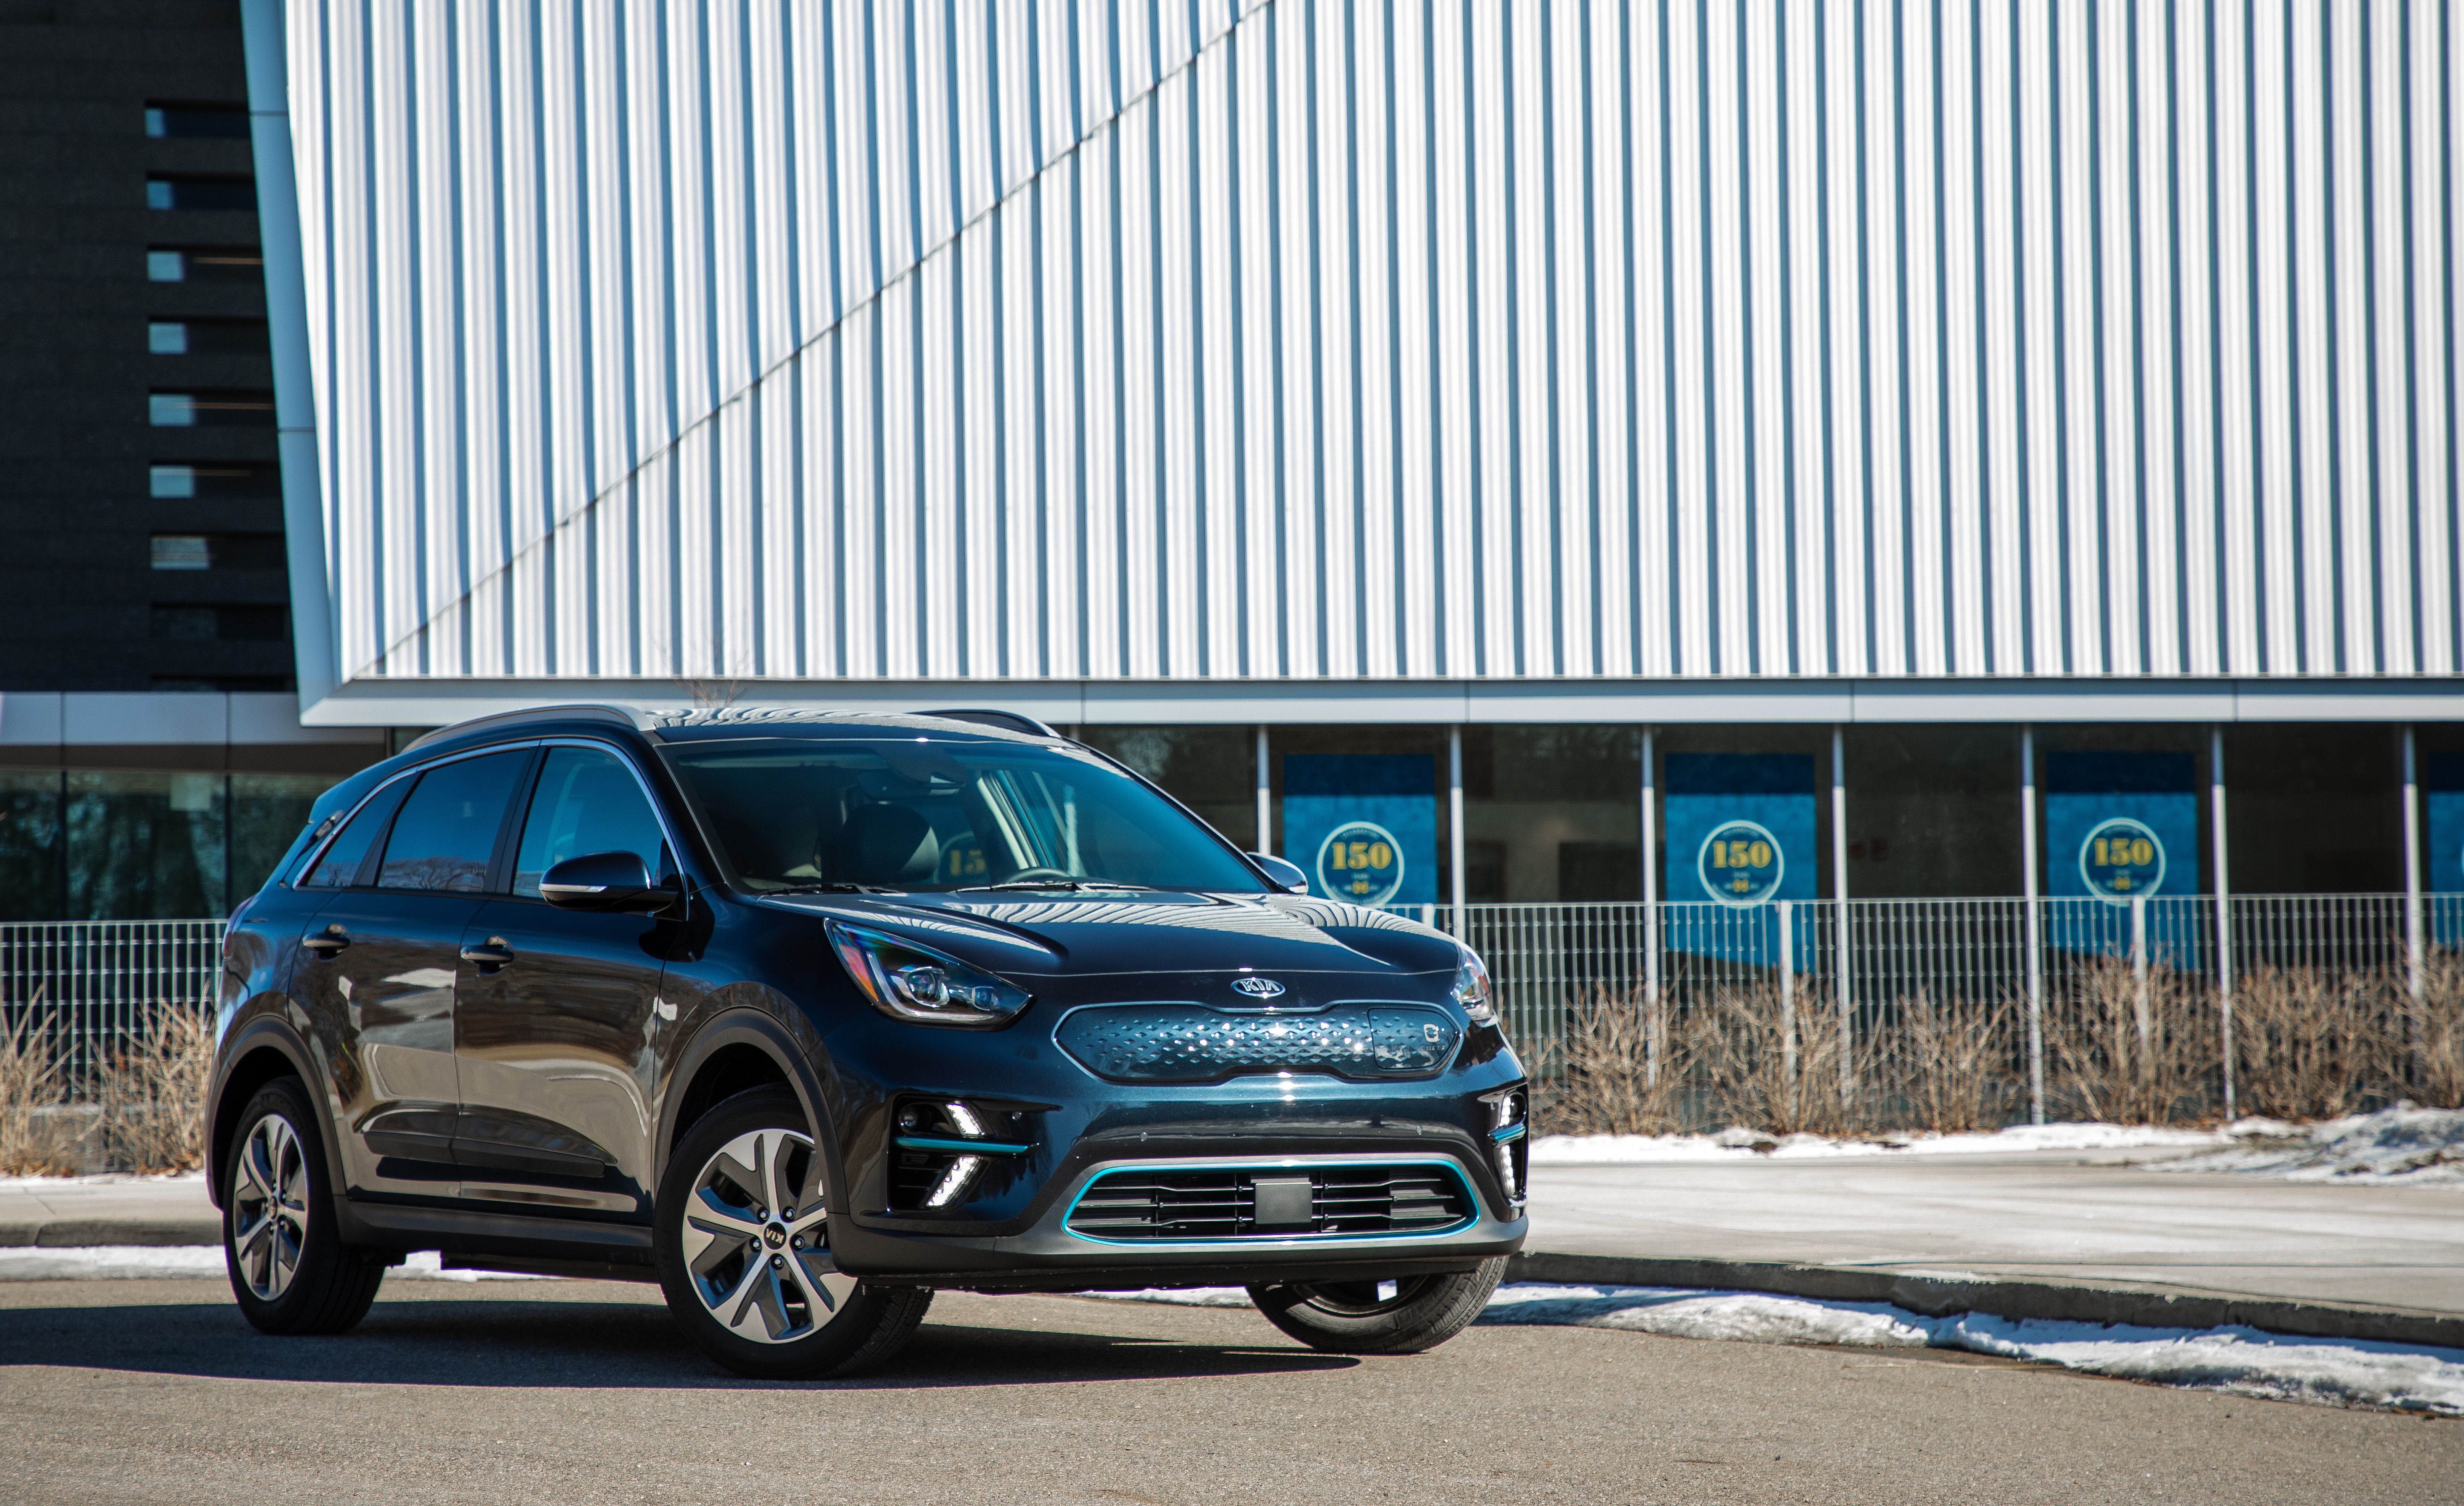 Land vehicle, 6.5 sec a 20-mile advantage over the Kona (both were tested in mid-20-degree winter temperatures).</p>
<p> Michelin Primacy MXV4, Curb weight: Rather, 3919 lb and a host of driver aids such as adaptive cruise control, <img src='https://hips.hearstapps.com/rover/profile_photos/c9106634-635e-4496-bcd9-cc3e136b92db_1543375543.jpg